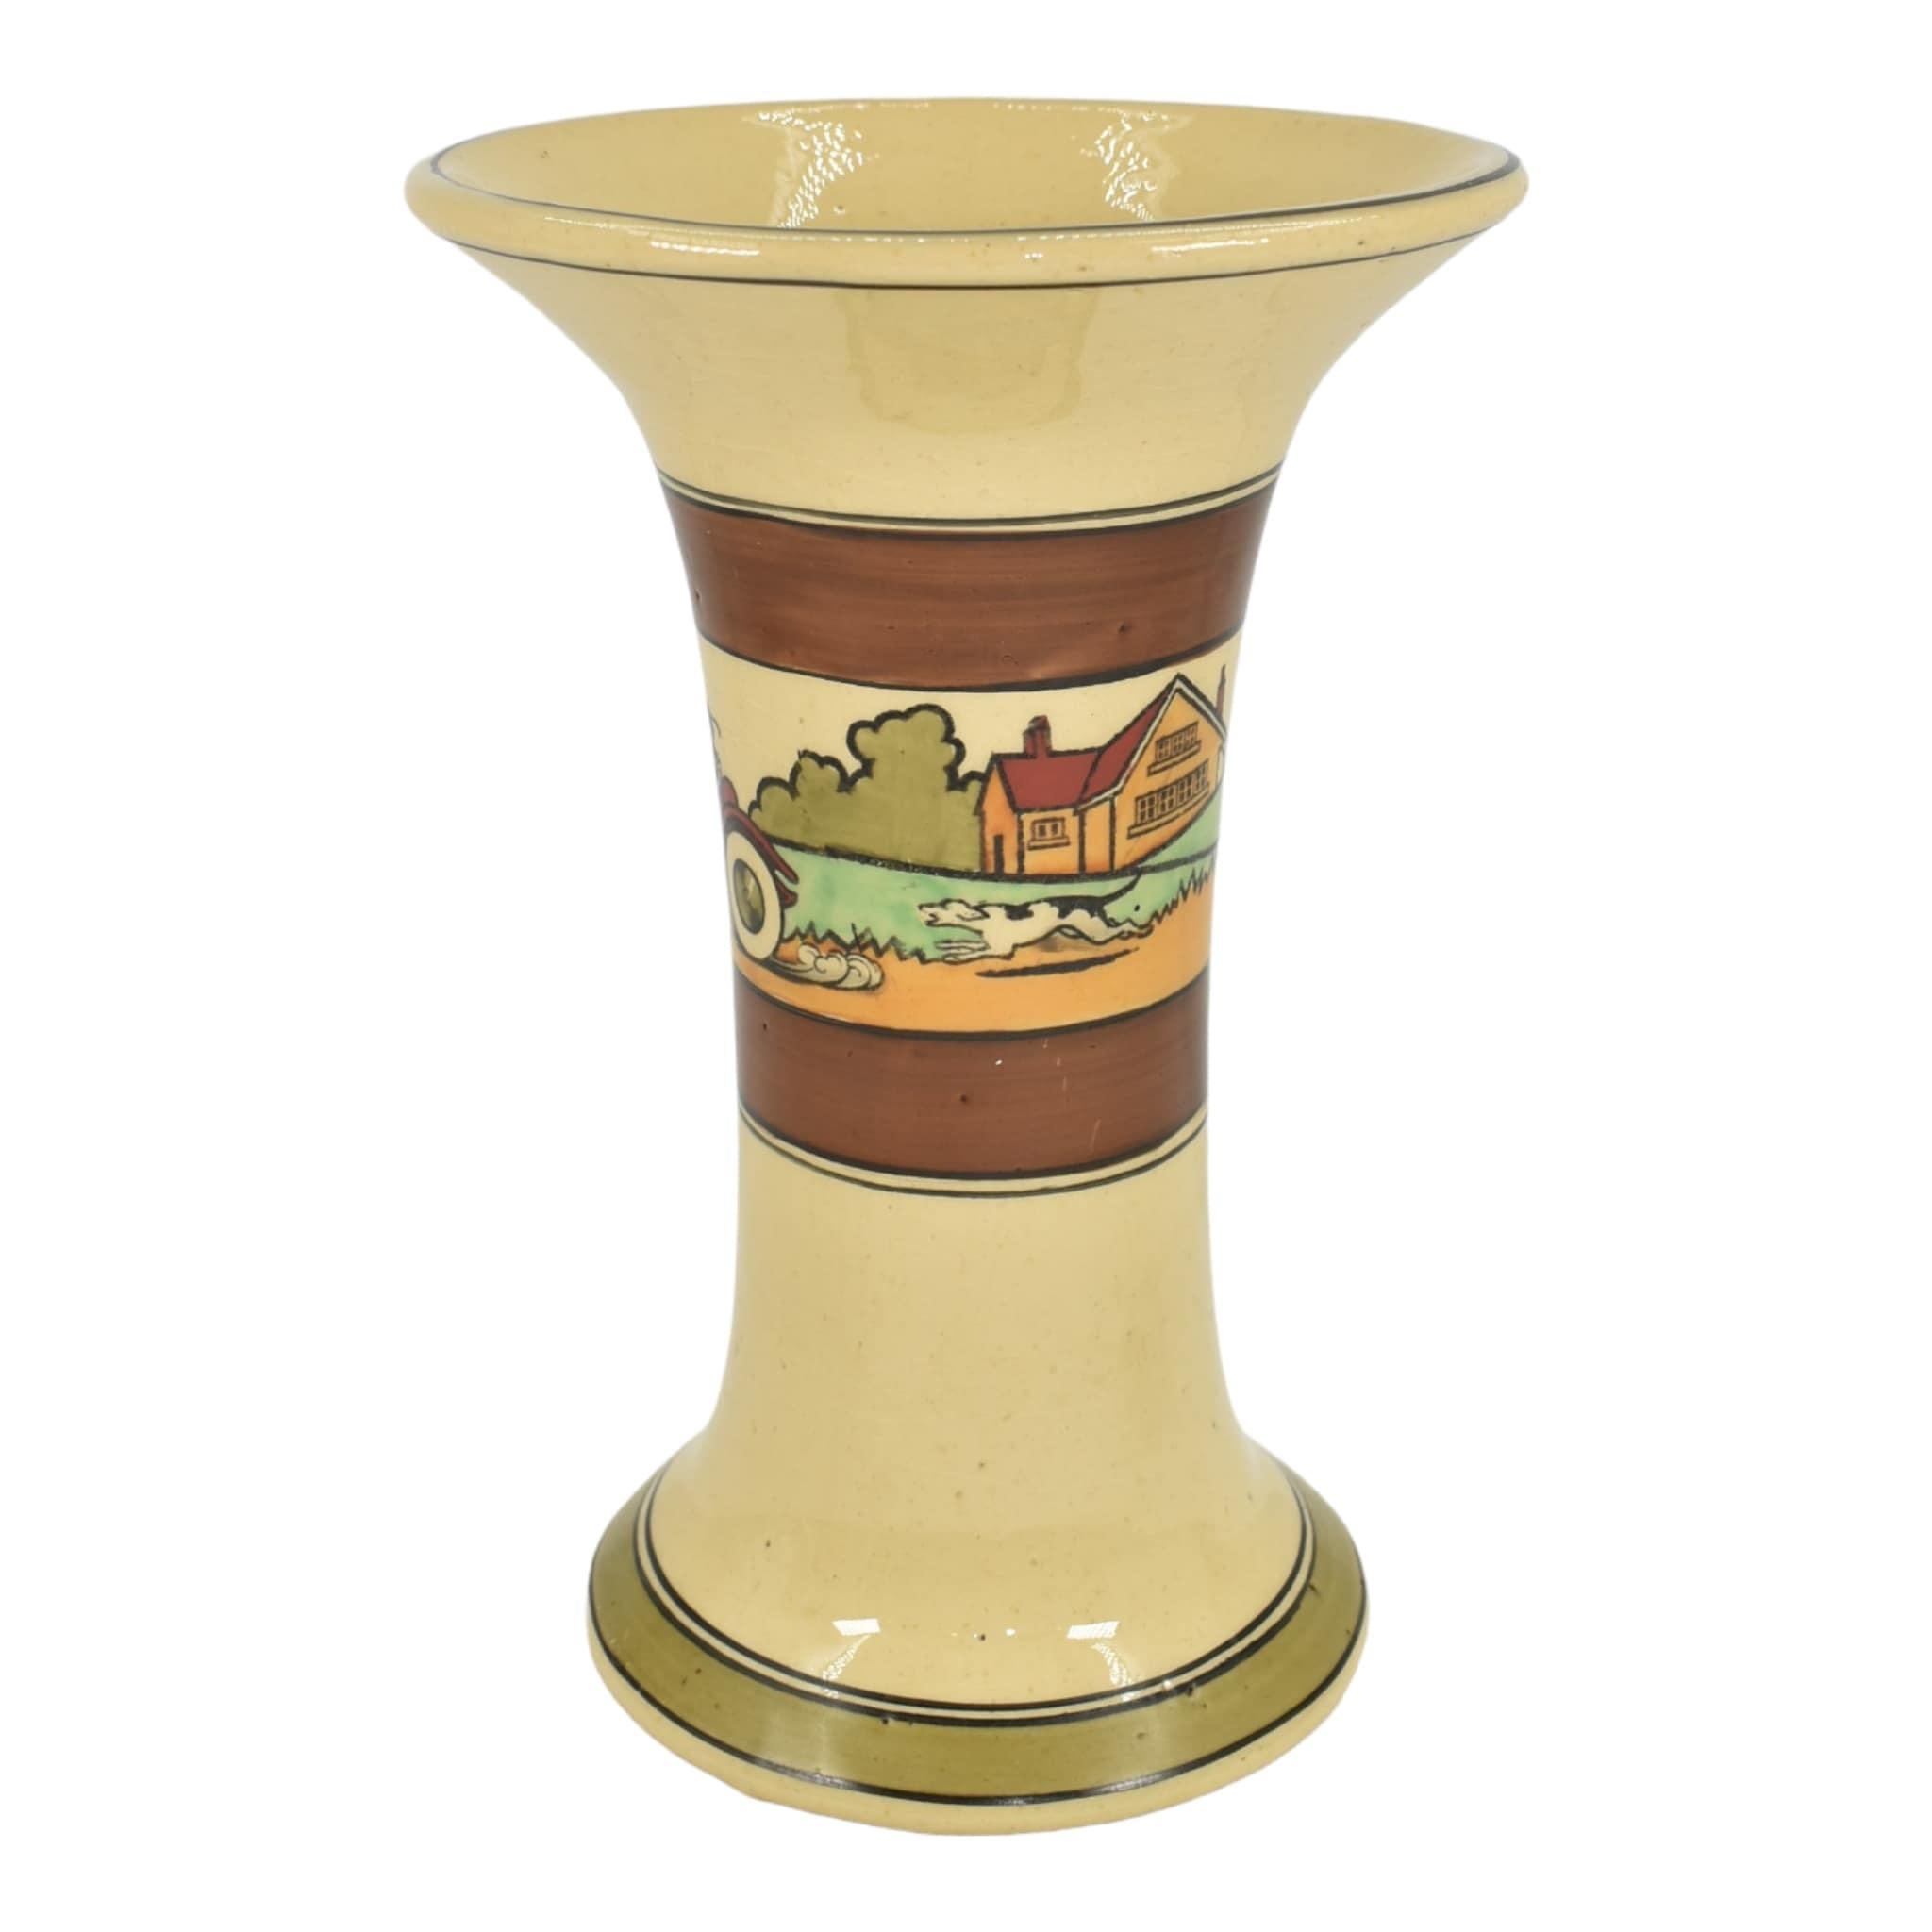 Roseville Tourist Creamware 1916 Arts And Crafts Pottery Flaring Rim Flower Vase
Rare and superior scenic vase with clean design and great color.
Excellent condition. No chips, cracks, damage or repair of any kind. Non showing factory stilt mark to